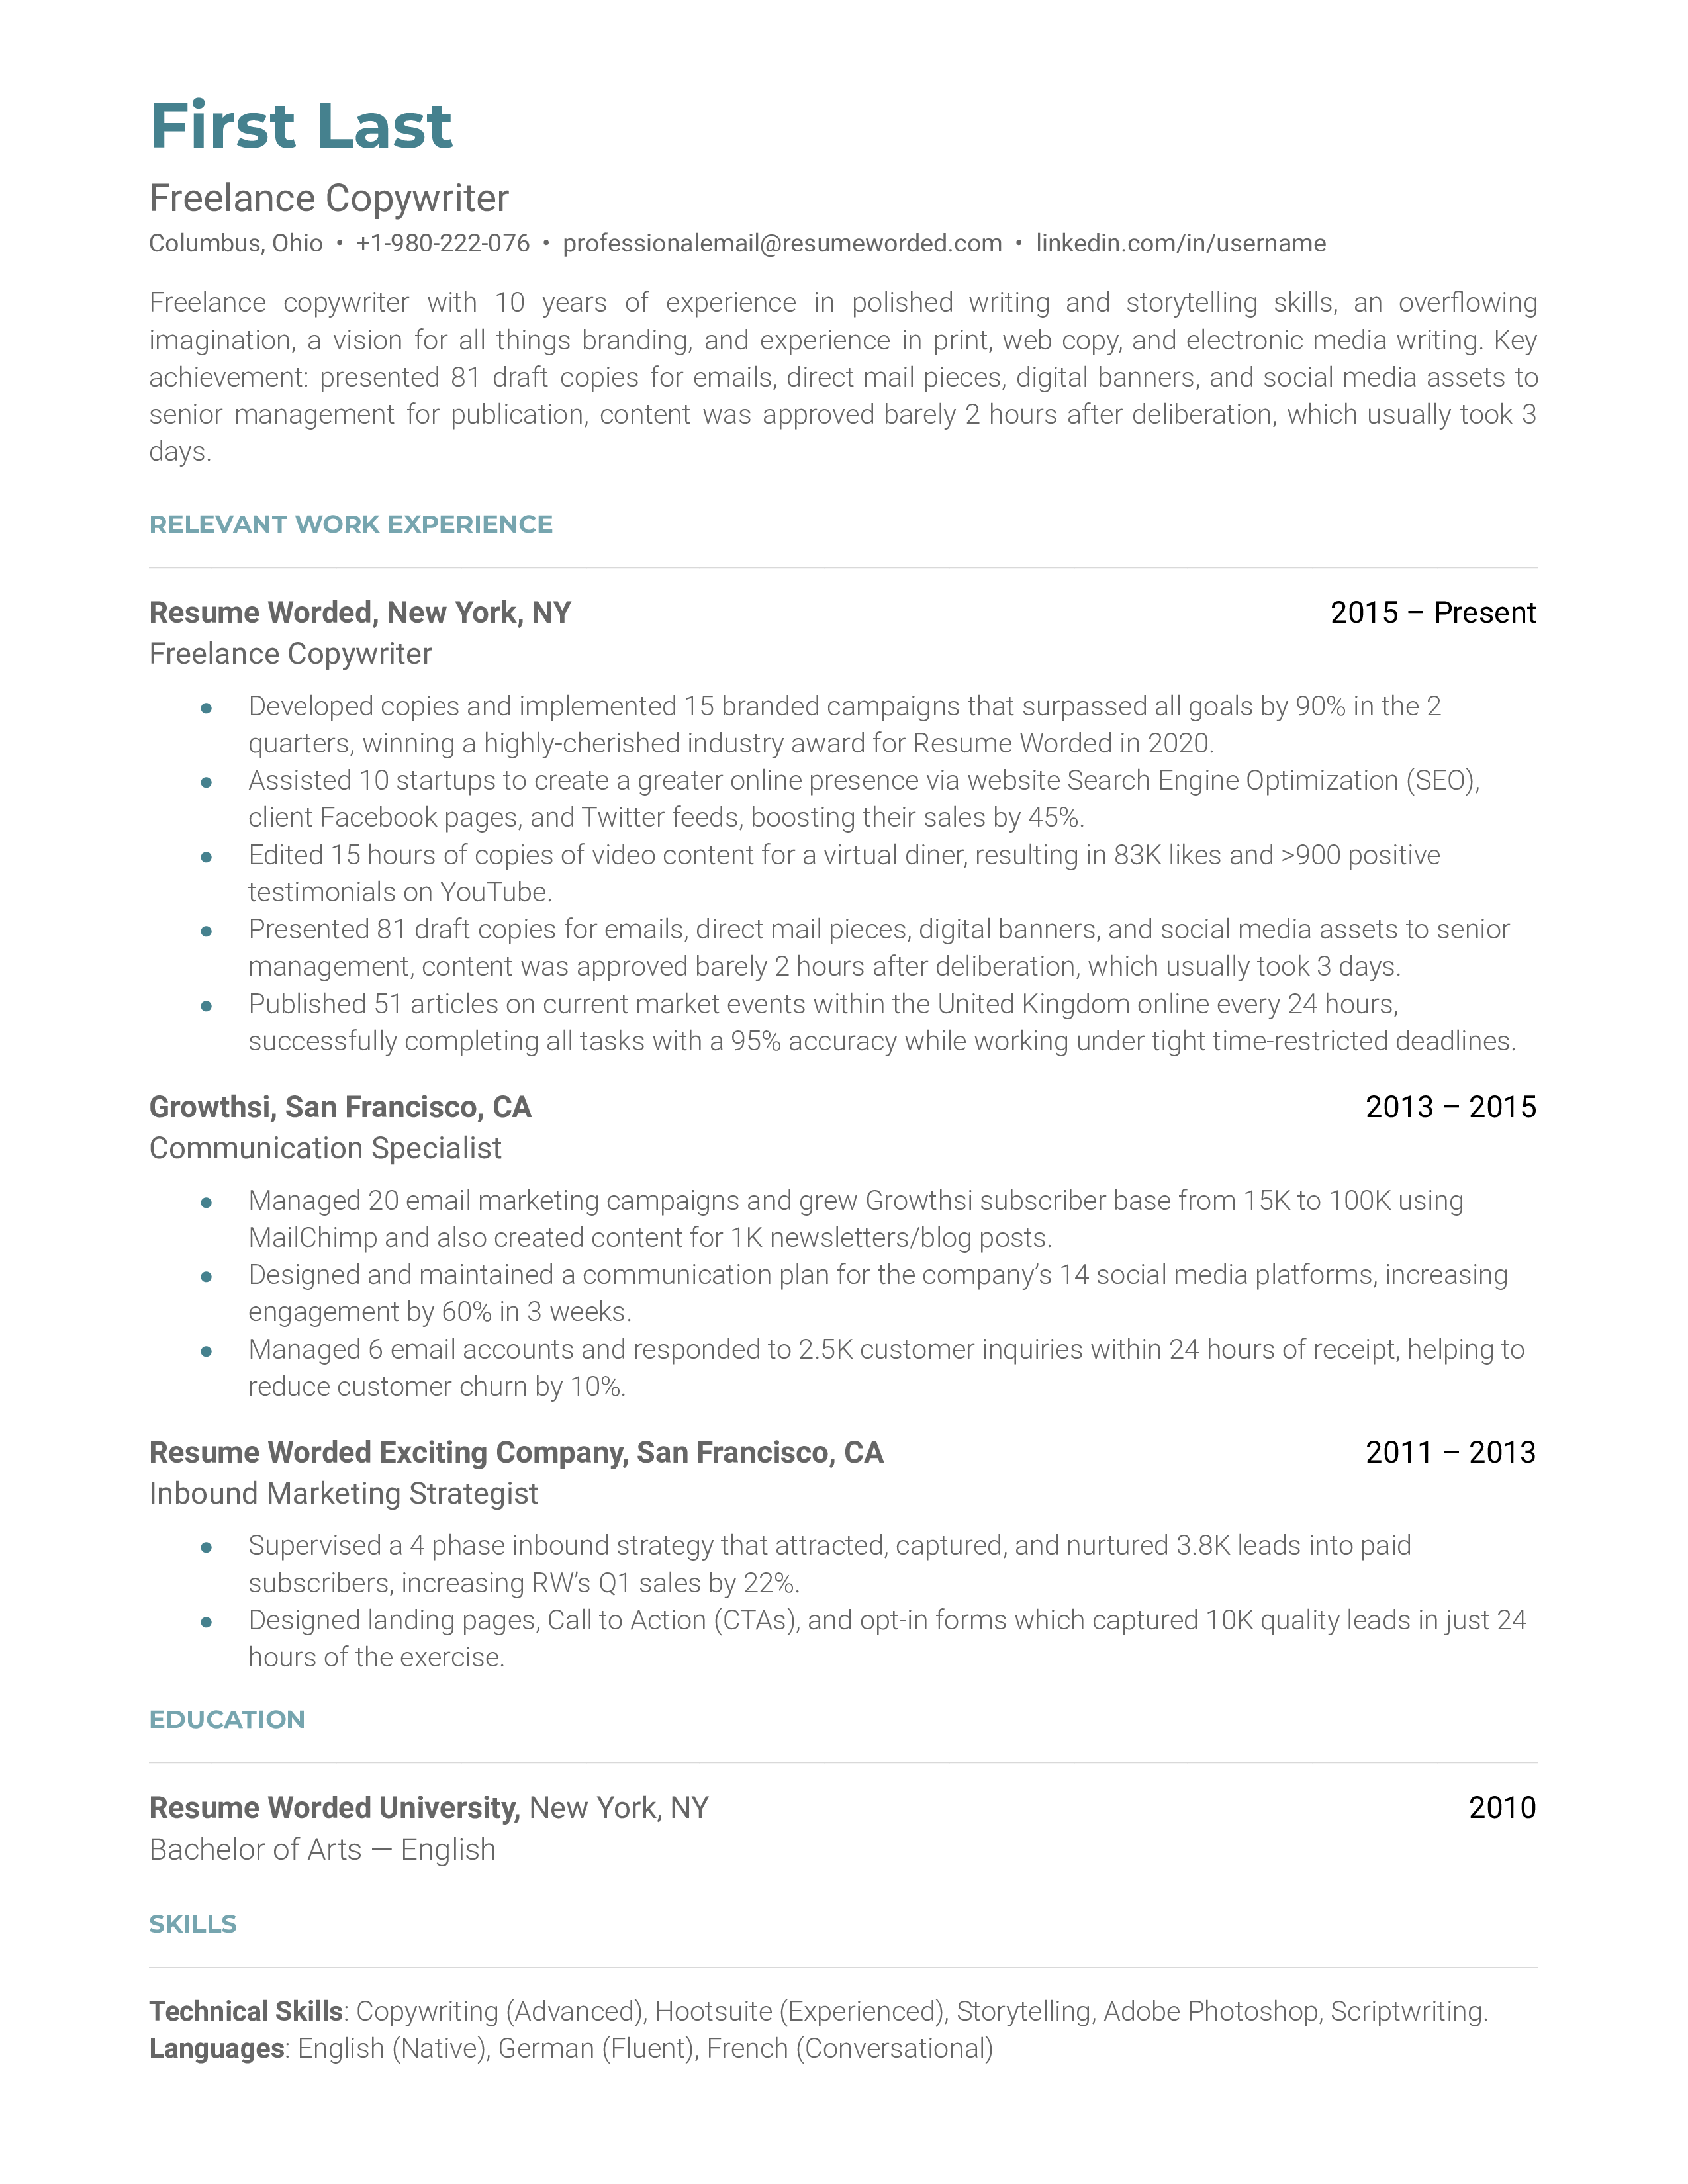 Freelance copywriter resume sample that highlights a freelancer's experience and work success.